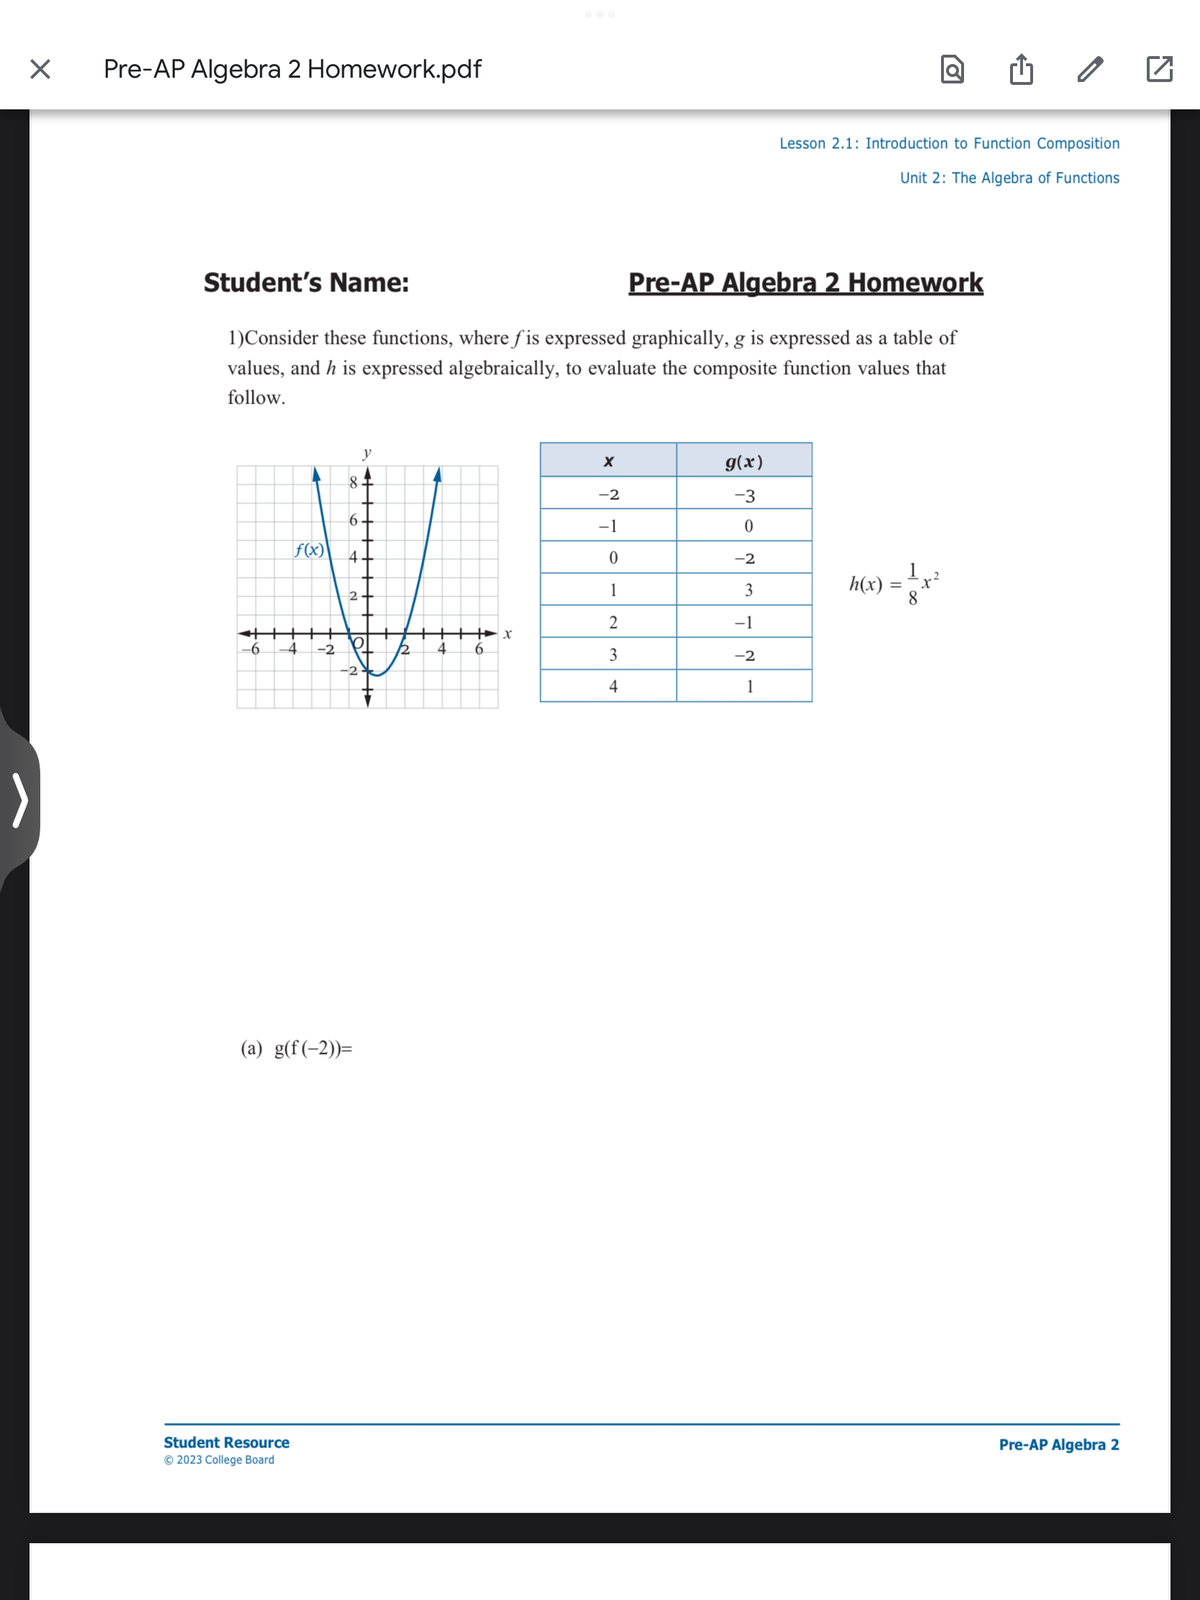 X
Pre-AP Algebra 2 Homework.pdf
-6
Student's Name:
Pre-AP Algebra 2 Homework
1)Consider these functions, where fis expressed graphically, g is expressed as a table of
values, and h is expressed algebraically, to evaluate the composite function values that
follow.
f(x)
-4 -2
Student Resource
© 2023 College Board
8
y
6.
4-
(a) g(f(-2))=
O
12 4
6
X
X
-2
-1
0
1
2
3
4
g(x)
-3
0
-2
3
-1
-2
1
Lesson 2.1: Introduction to Function Composition
Unit 2: The Algebra of Functions
h(x)
la ₁
=
42
8
0
Pre-AP Algebra 2